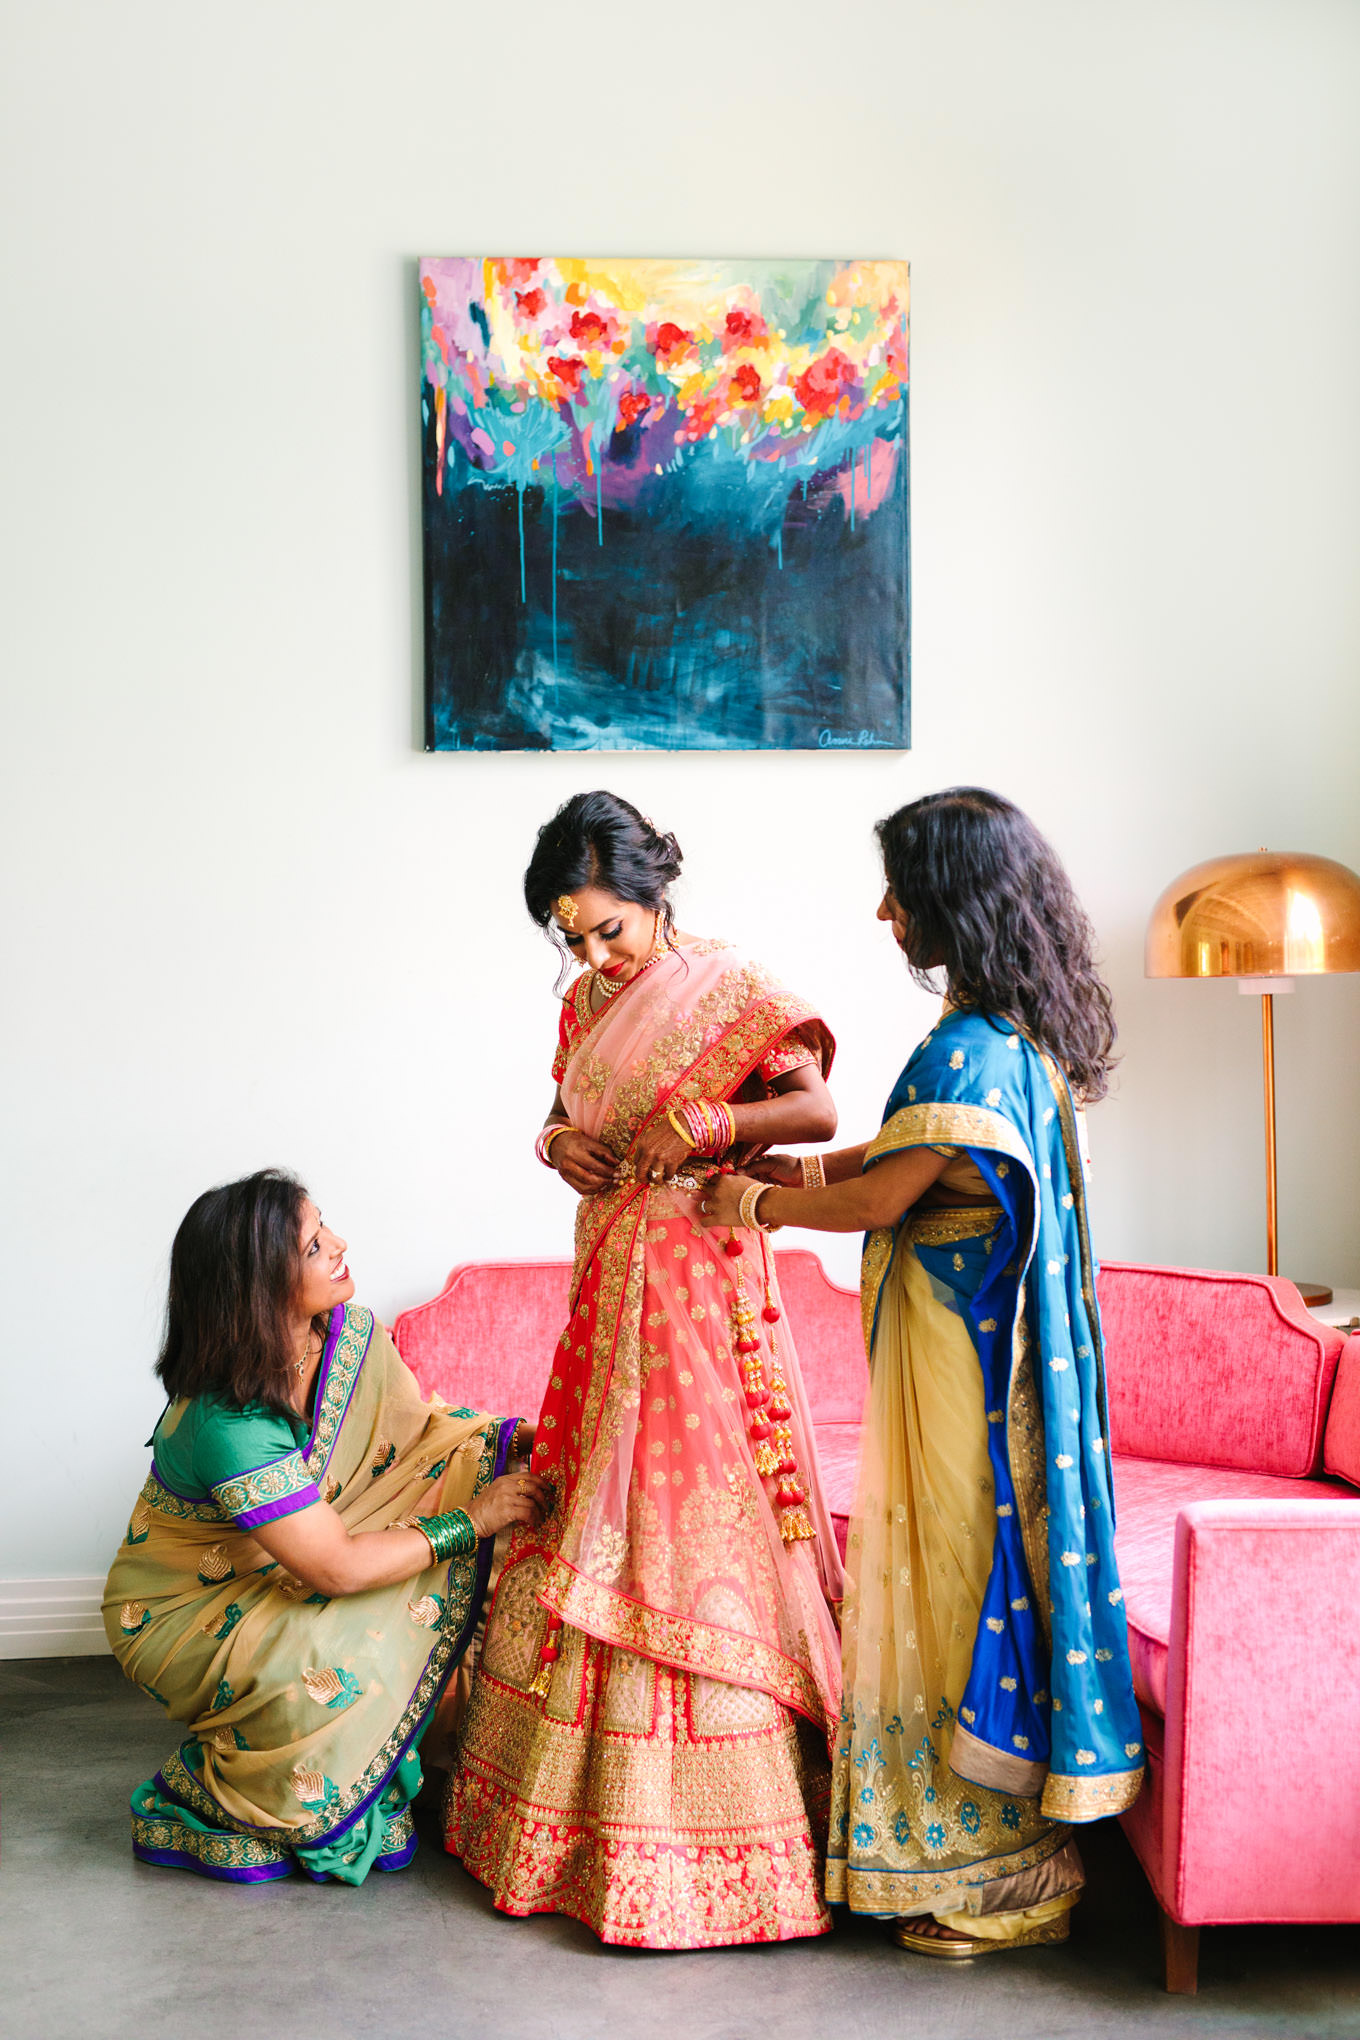 Bride getting dressed. Two Disney artists create a unique and colorful Indian Fusion wedding at The Fig House Los Angeles, featured on Green Wedding Shoes. | Colorful and elevated wedding inspiration for fun-loving couples in Southern California | #indianwedding #indianfusionwedding #thefighouse #losangeleswedding   Source: Mary Costa Photography | Los Angeles